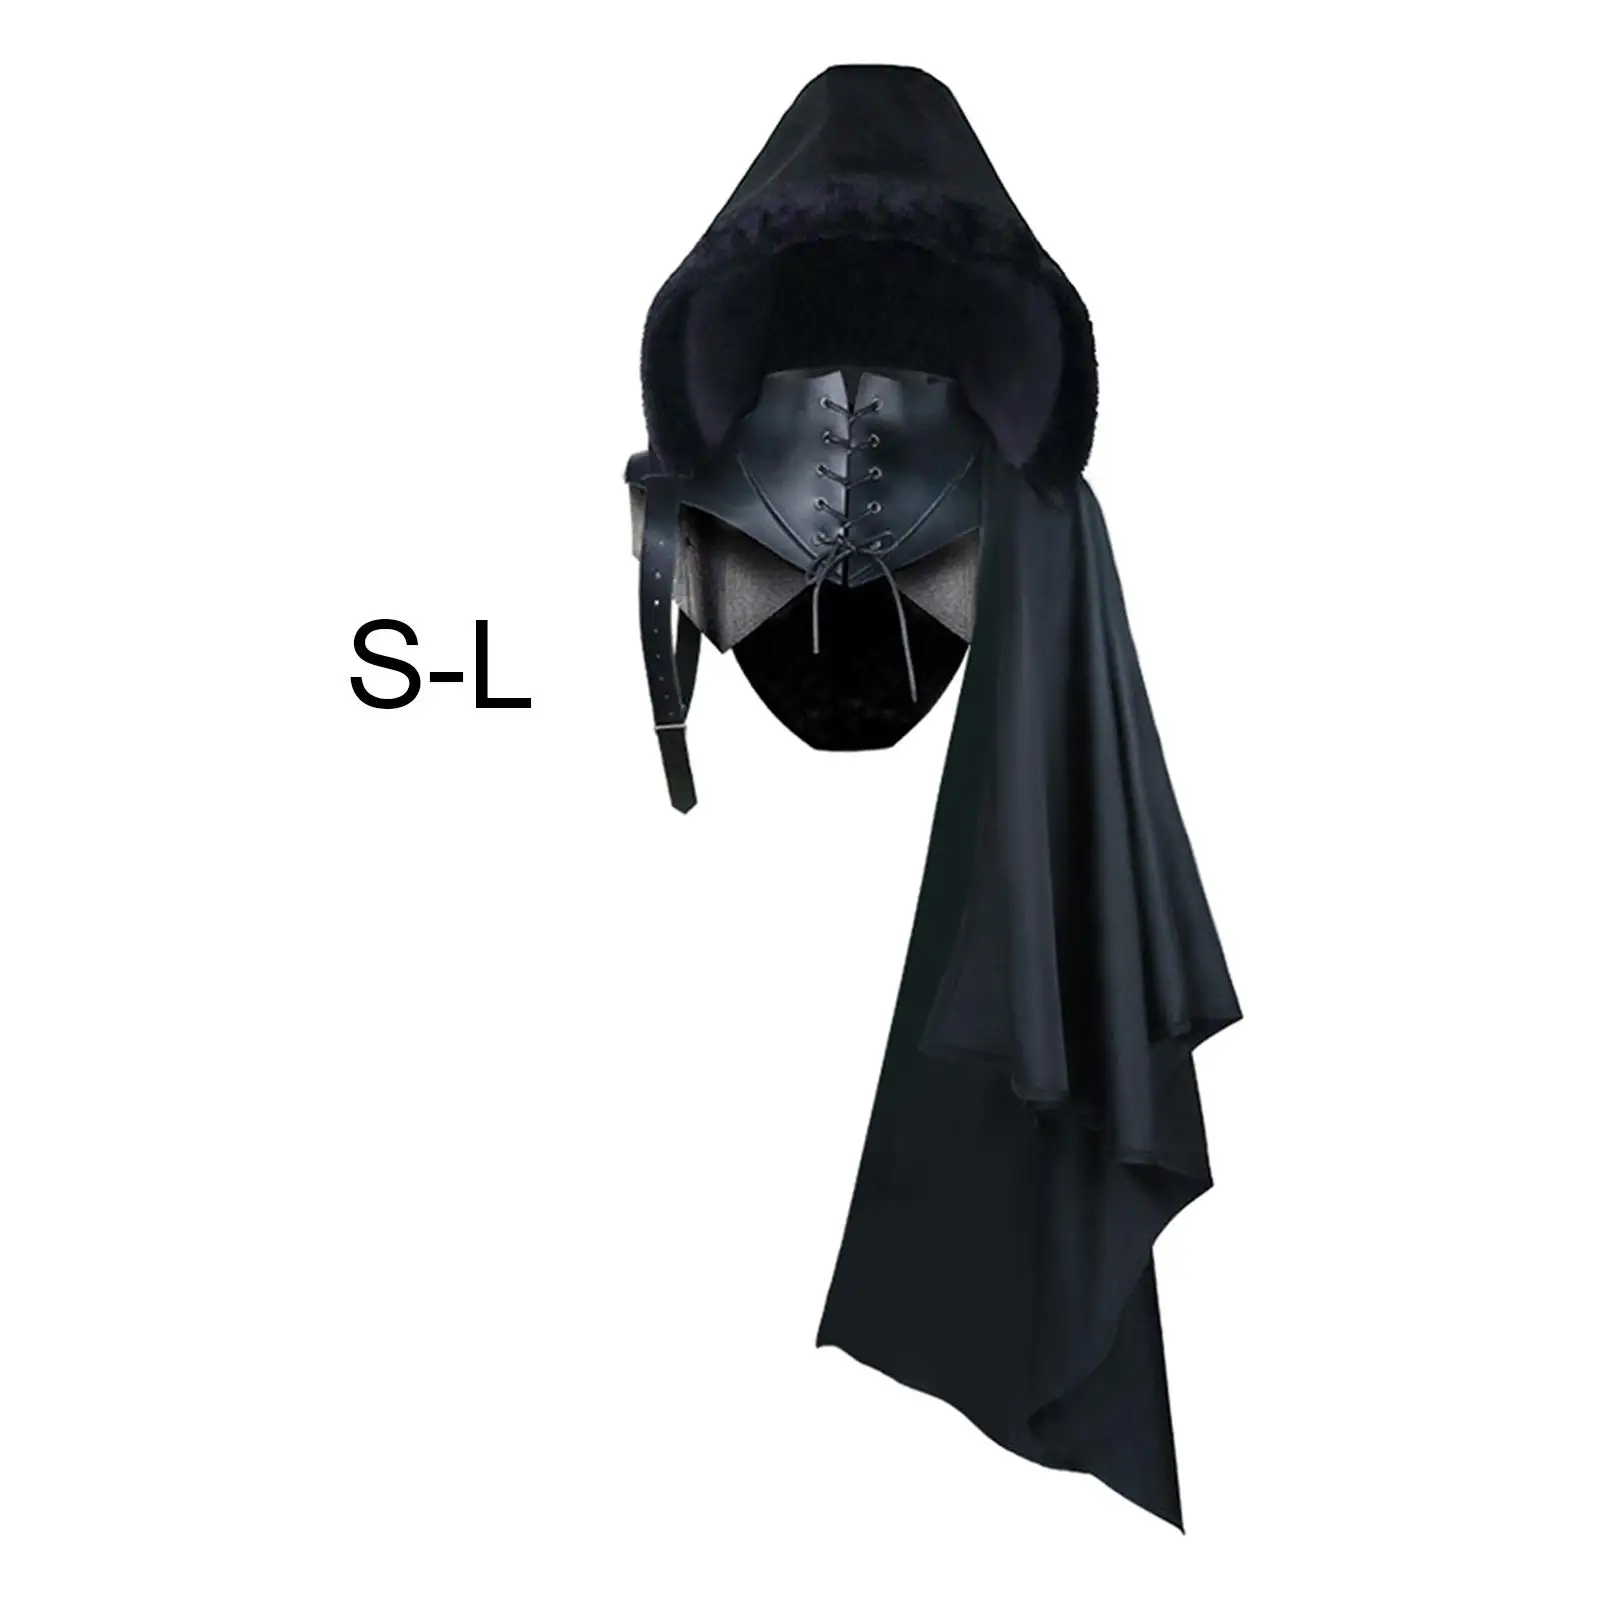 Black Cape Cloak with Buckle Straps Uniform Gothic Adult Punk Hooded Cape Medieval Cloak Cosplay Costume